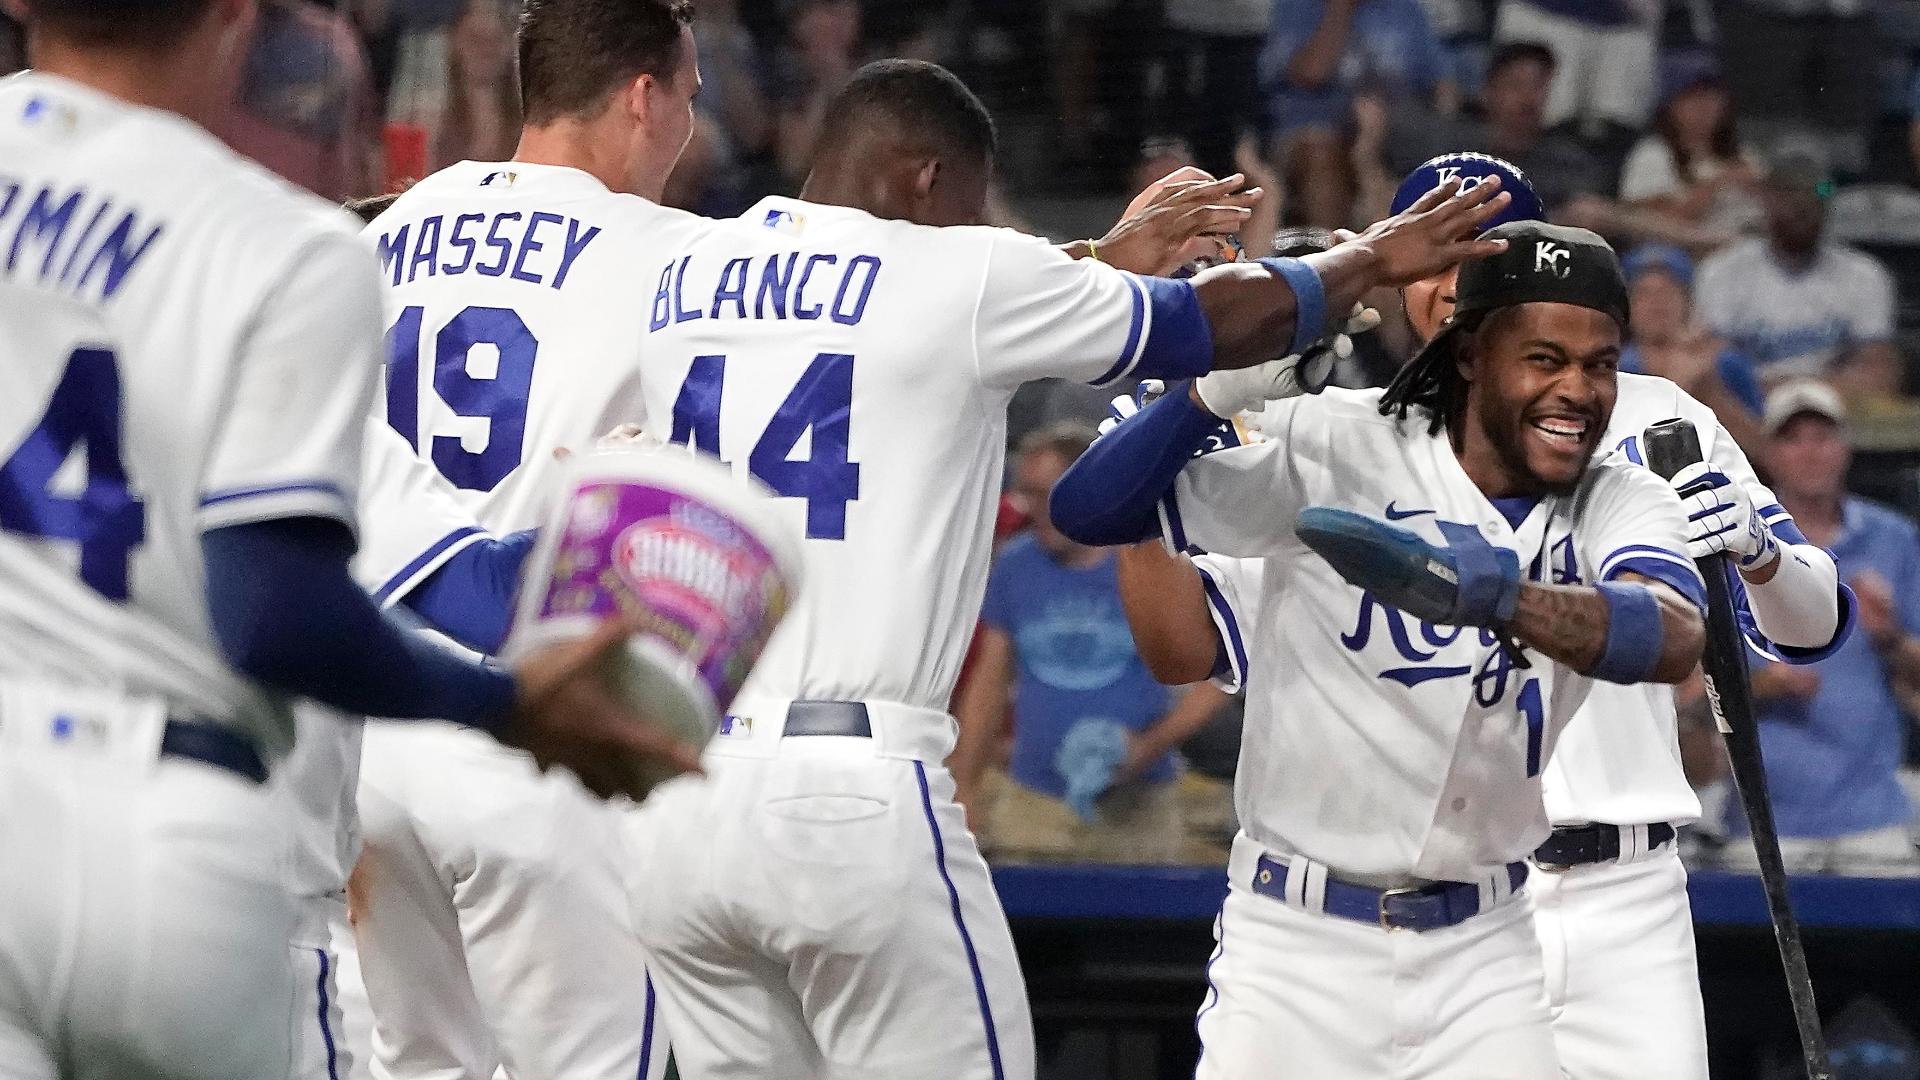 Royals waste 9-run lead, beat White Sox 11-10 in nightcap after